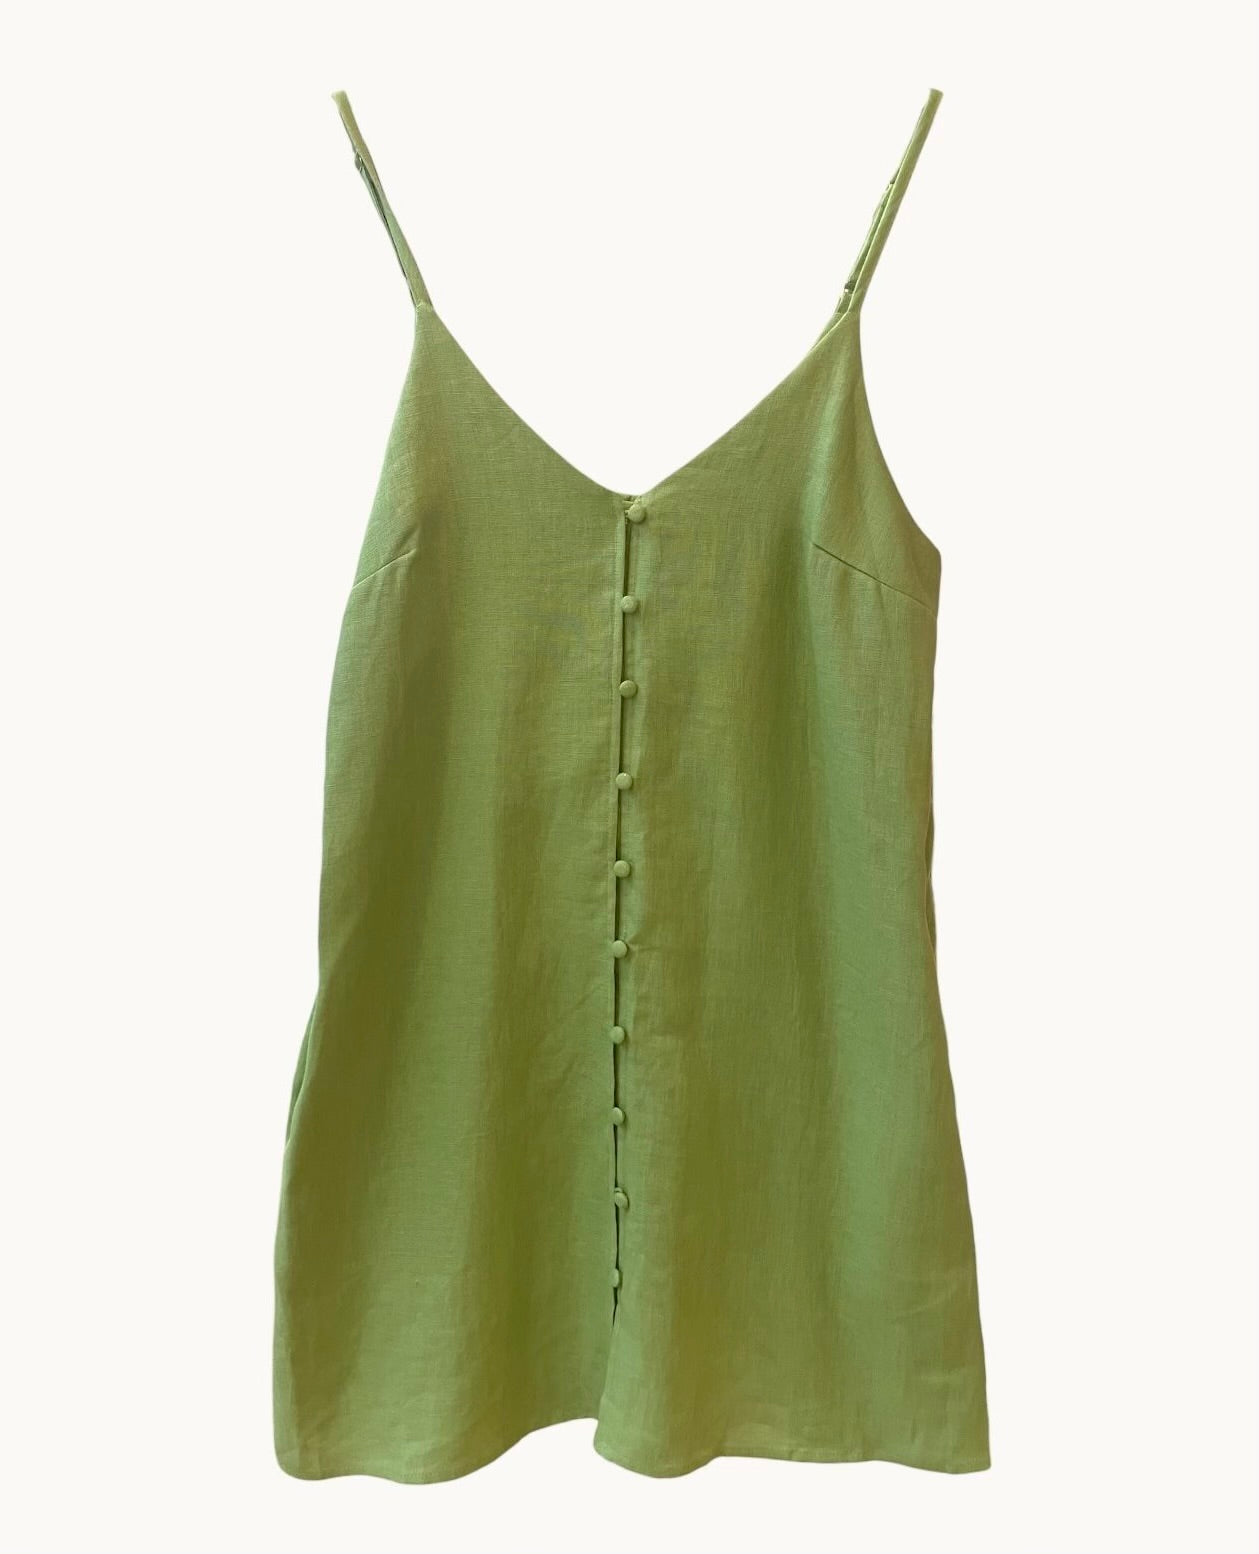 Expertly designed by Little Lies, the Reagan Dress in green is a must-have addition to any wardrobe. This stylish dress boasts a timeless design, made from high-quality materials for maximum comfort and durability. Perfect for any occasion, the Reagan Dress is sure to impress with its elegant and versatile style.